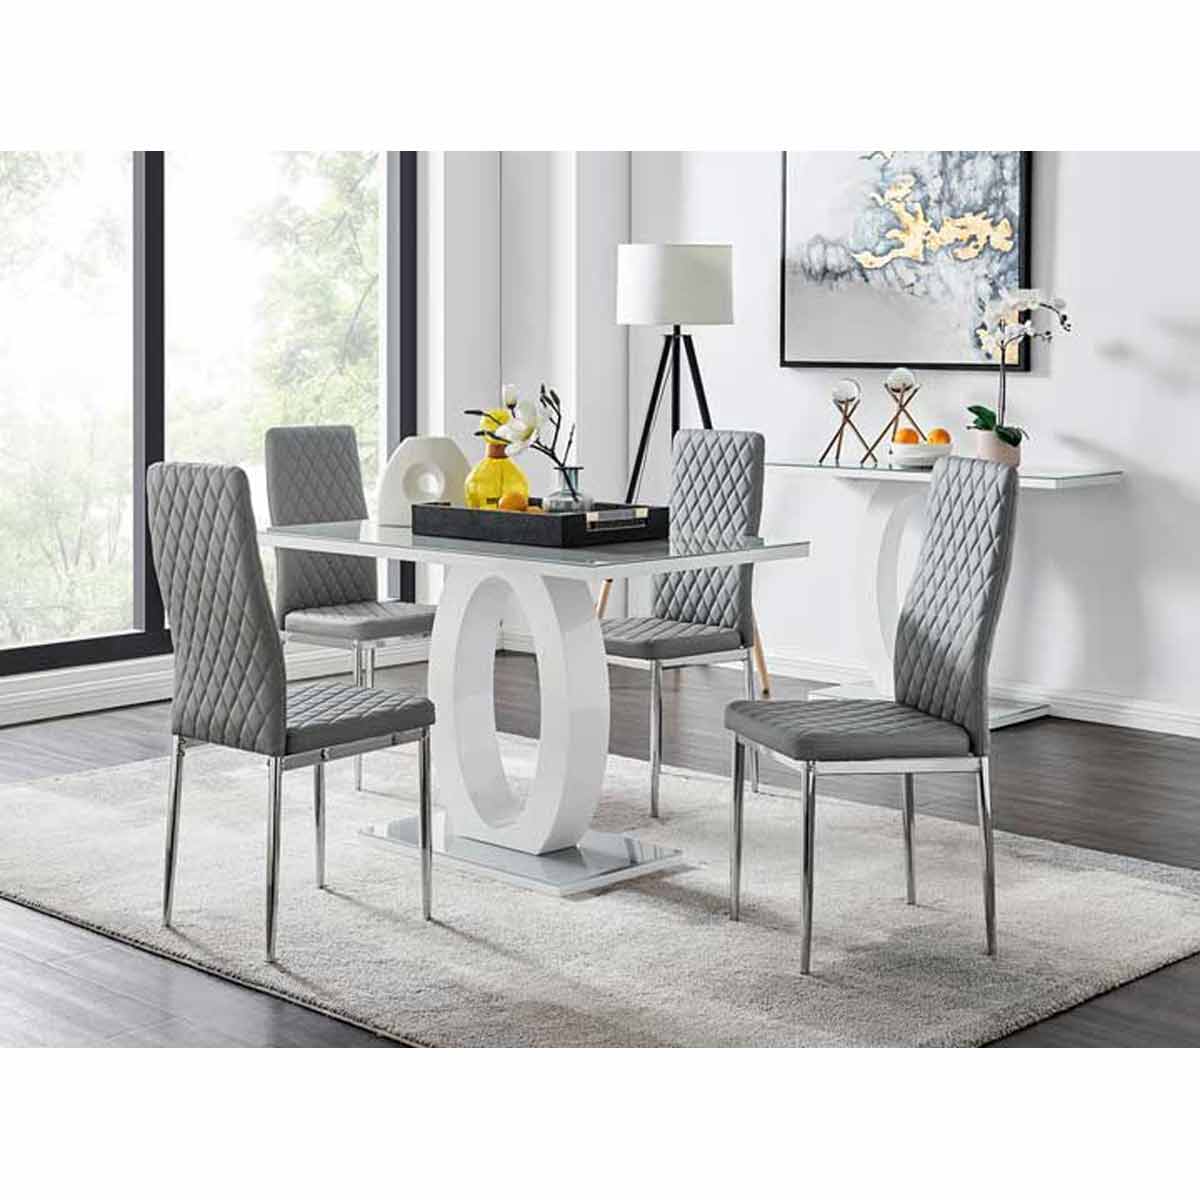 Furniture Box Giovani Grey White Modern High Gloss And Glass Dining Table And 4 x Grey Milan Chairs Set